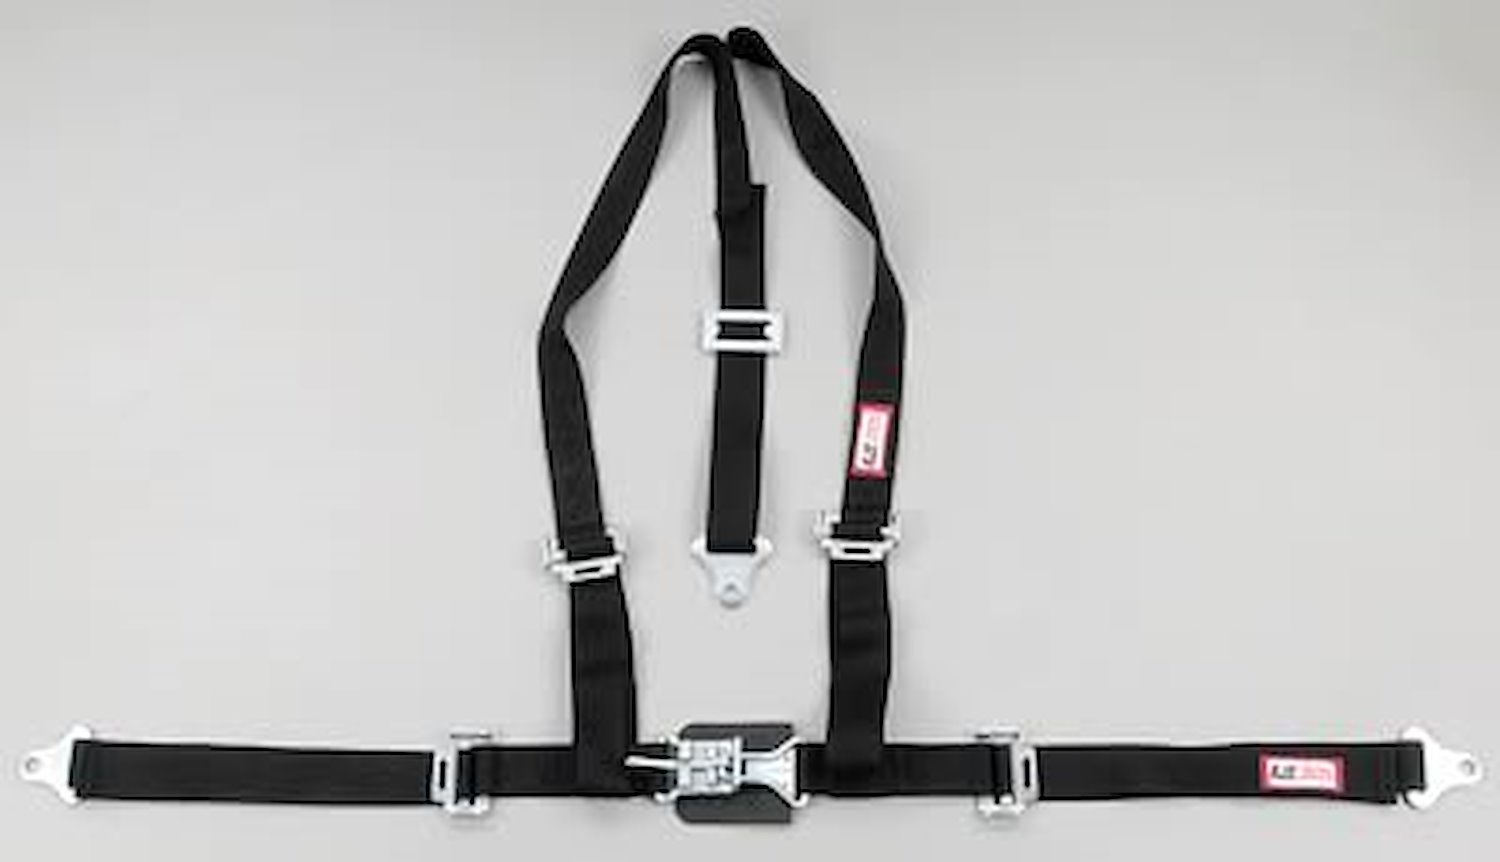 NON-SFI L&L HARNESS 3 PULL UP Lap Belt SNAP SEWN IN 2 S.H. Individual FLOOR Mount w/STERNUM STRAP WRAP/BOLT HOT PINK